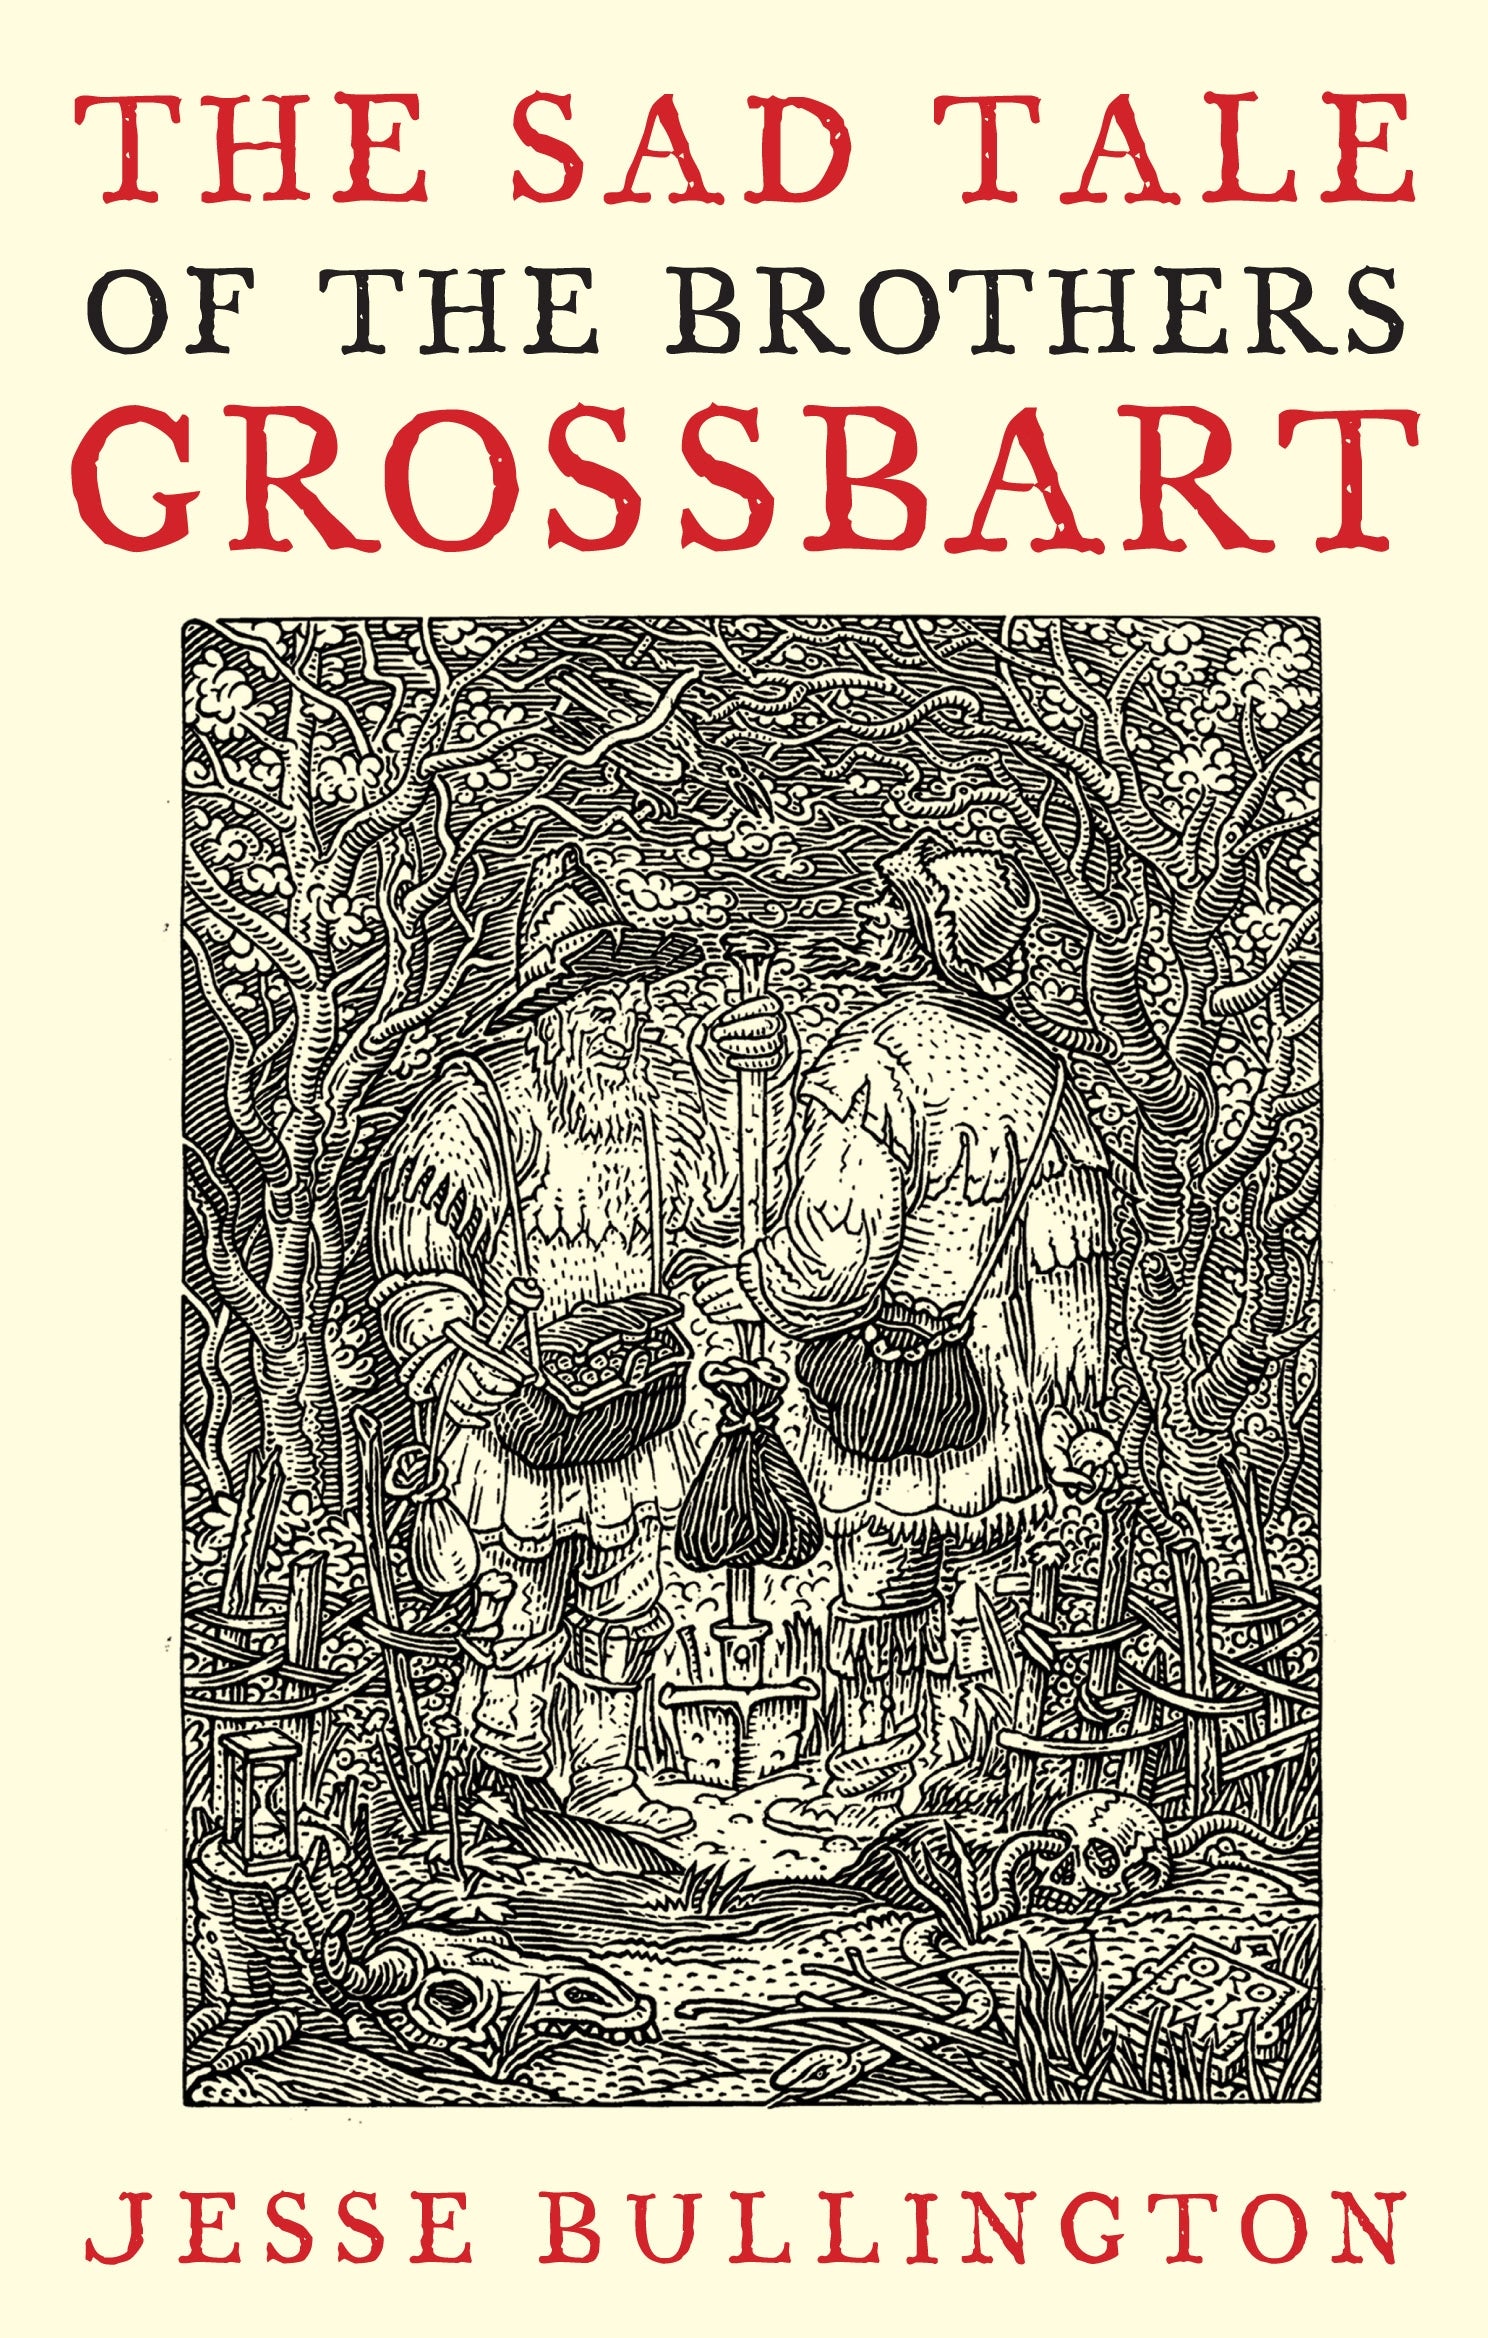 The Sad Tale Of The Brothers Grossbart by Jesse Bullington